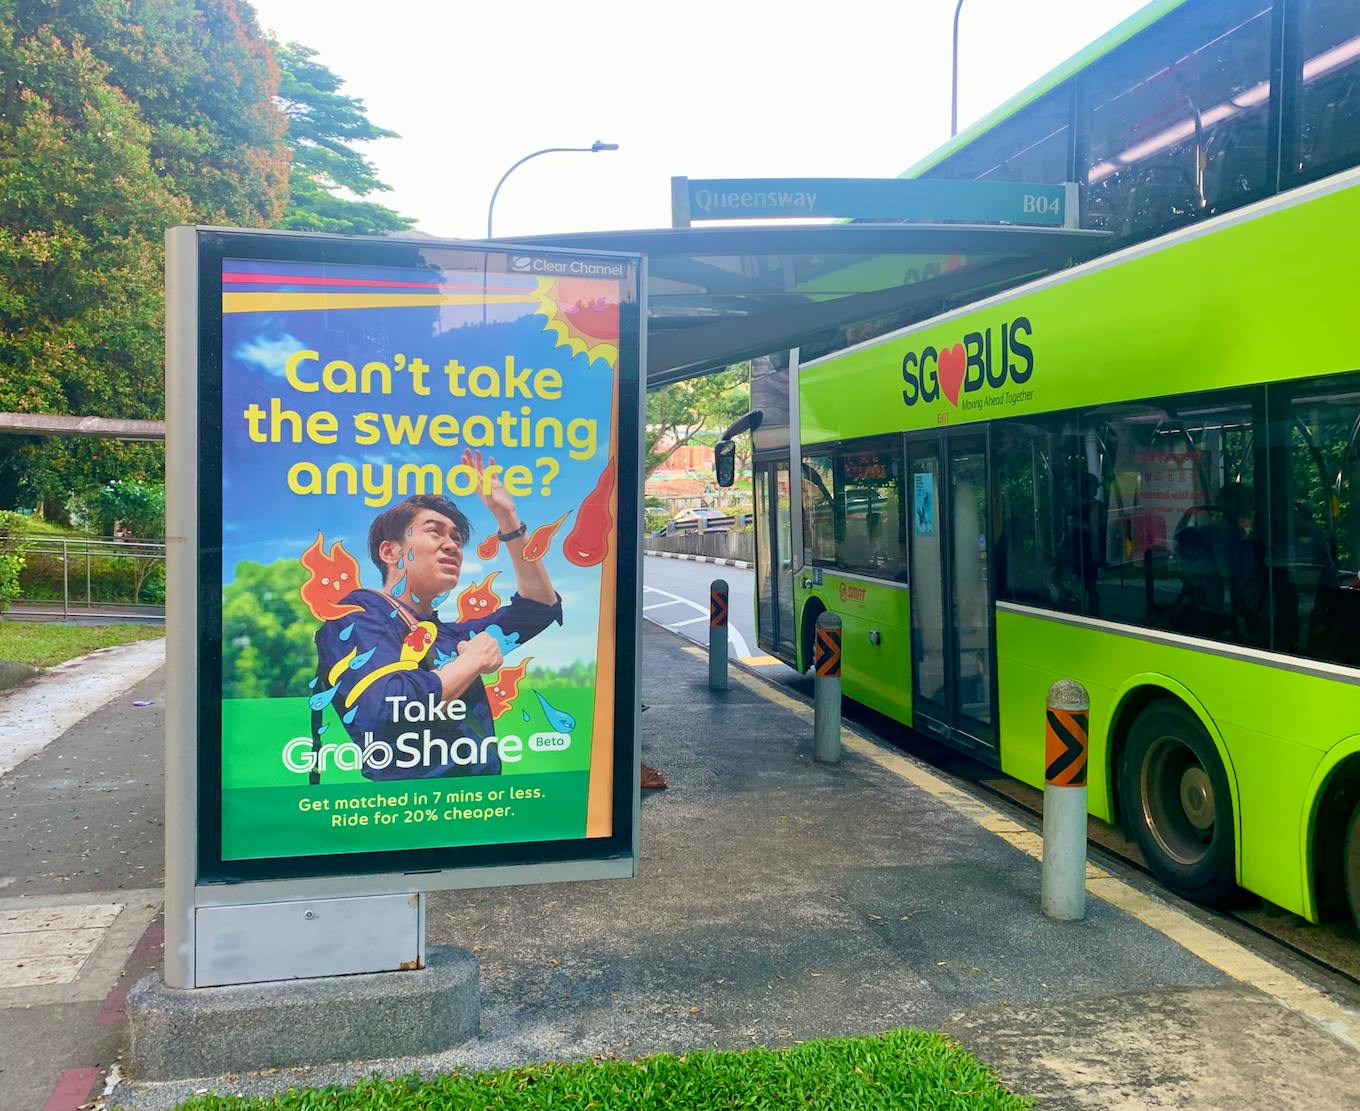 An advertisement for Grab's ride-share service